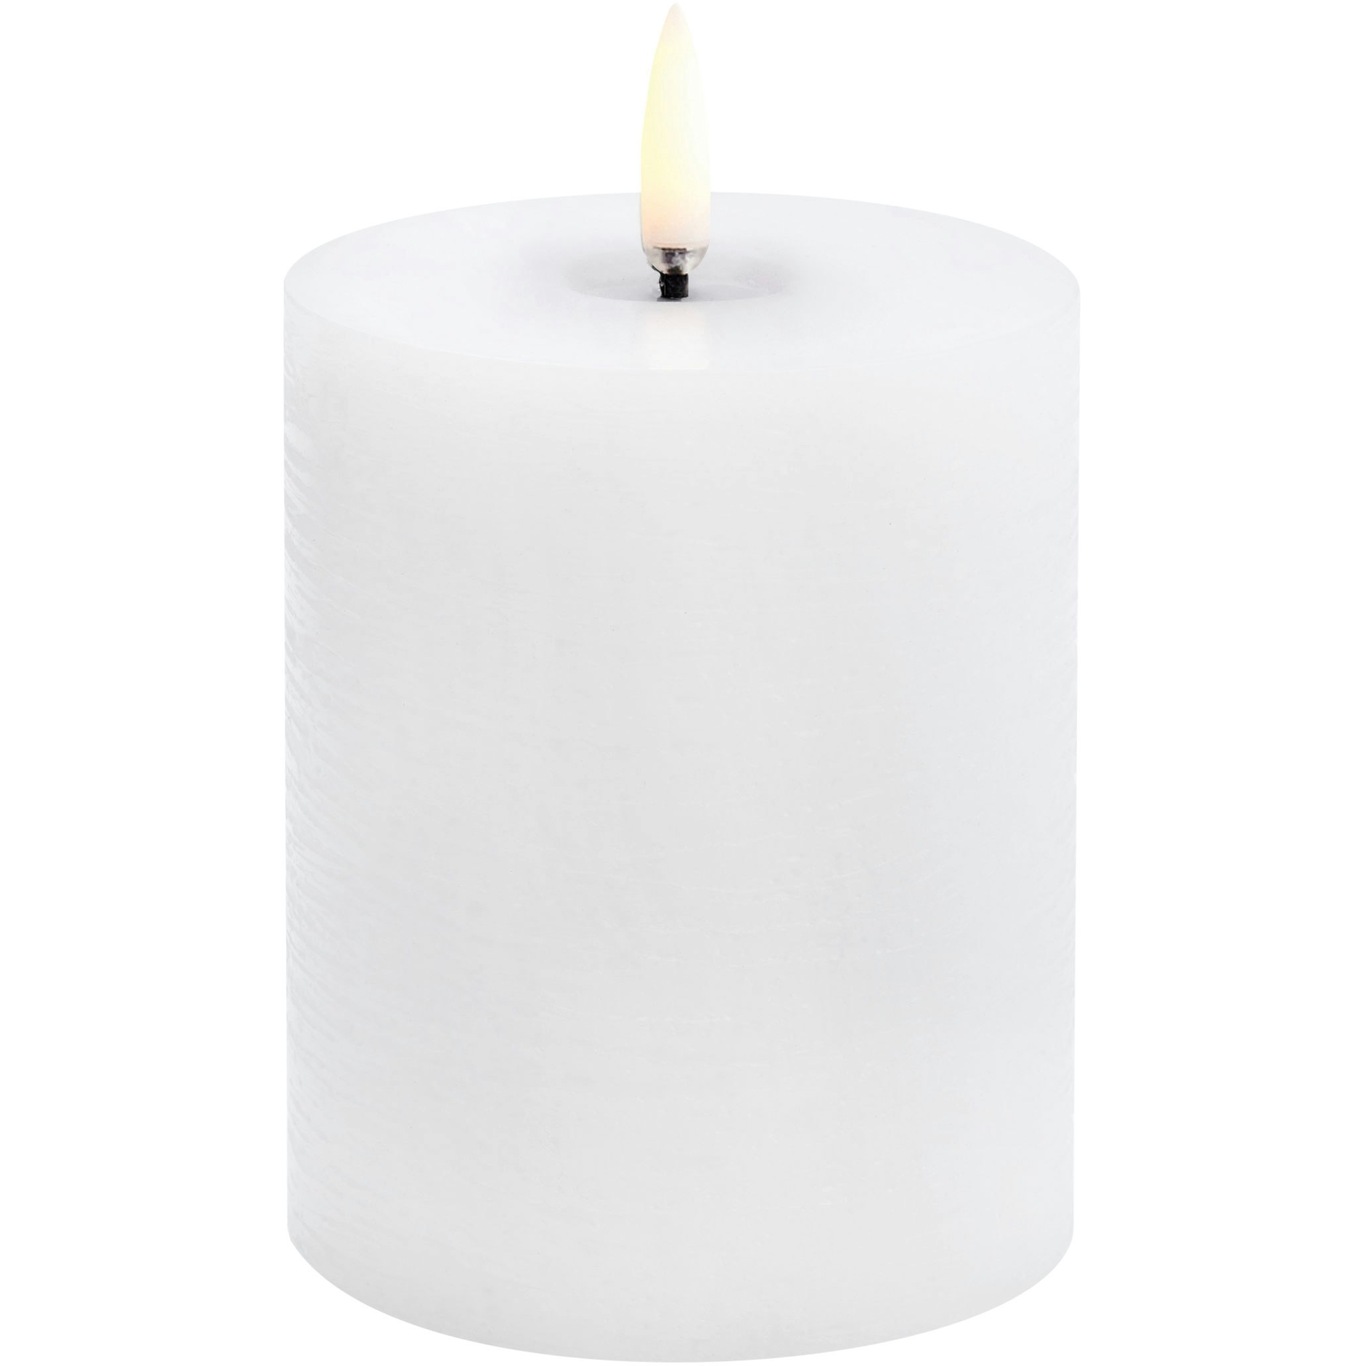 LED Pillar Candle Melted 7,8x10,1 cm, Nordic White